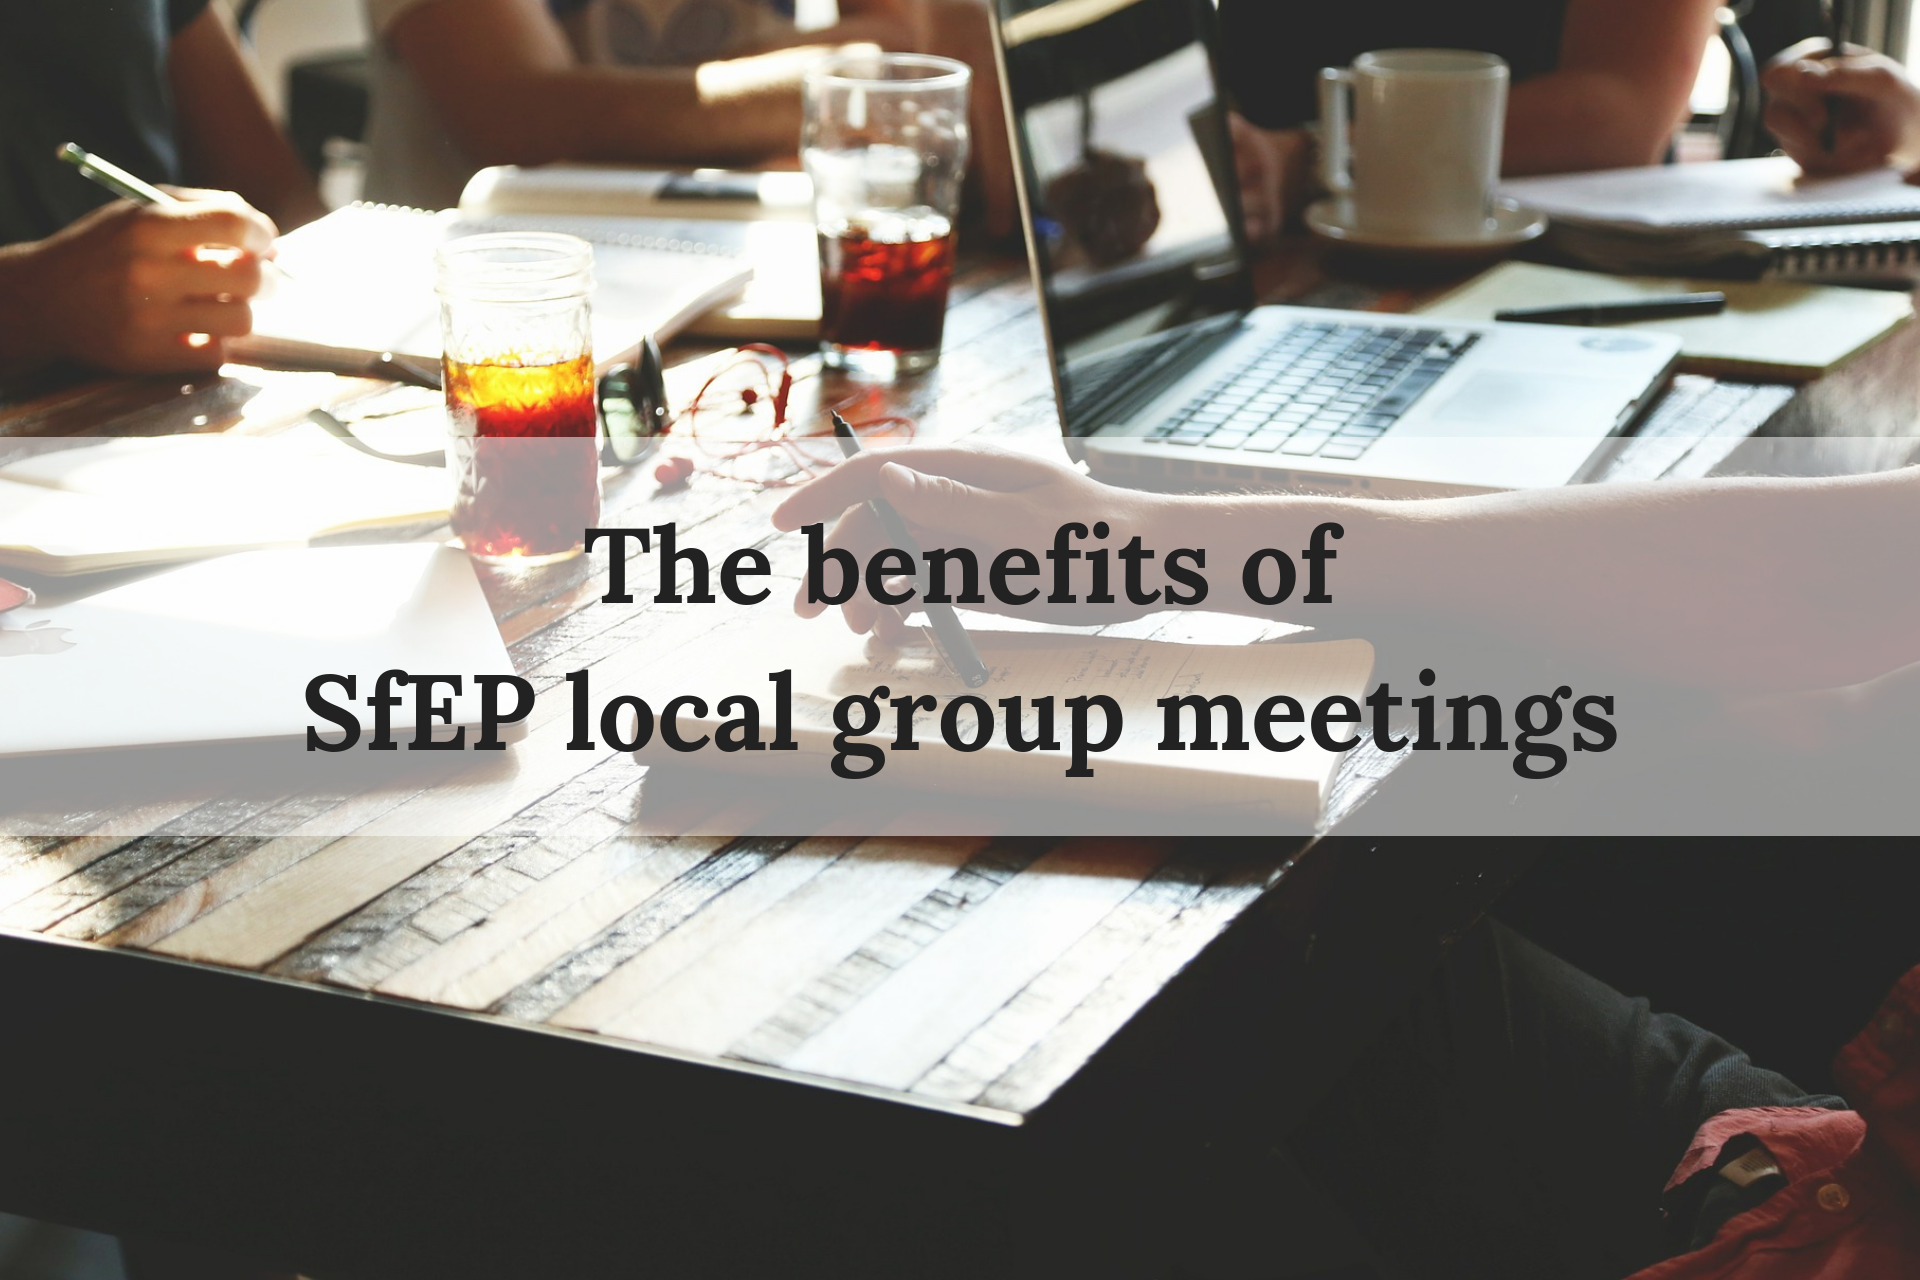 The benefits of SfEP local groups